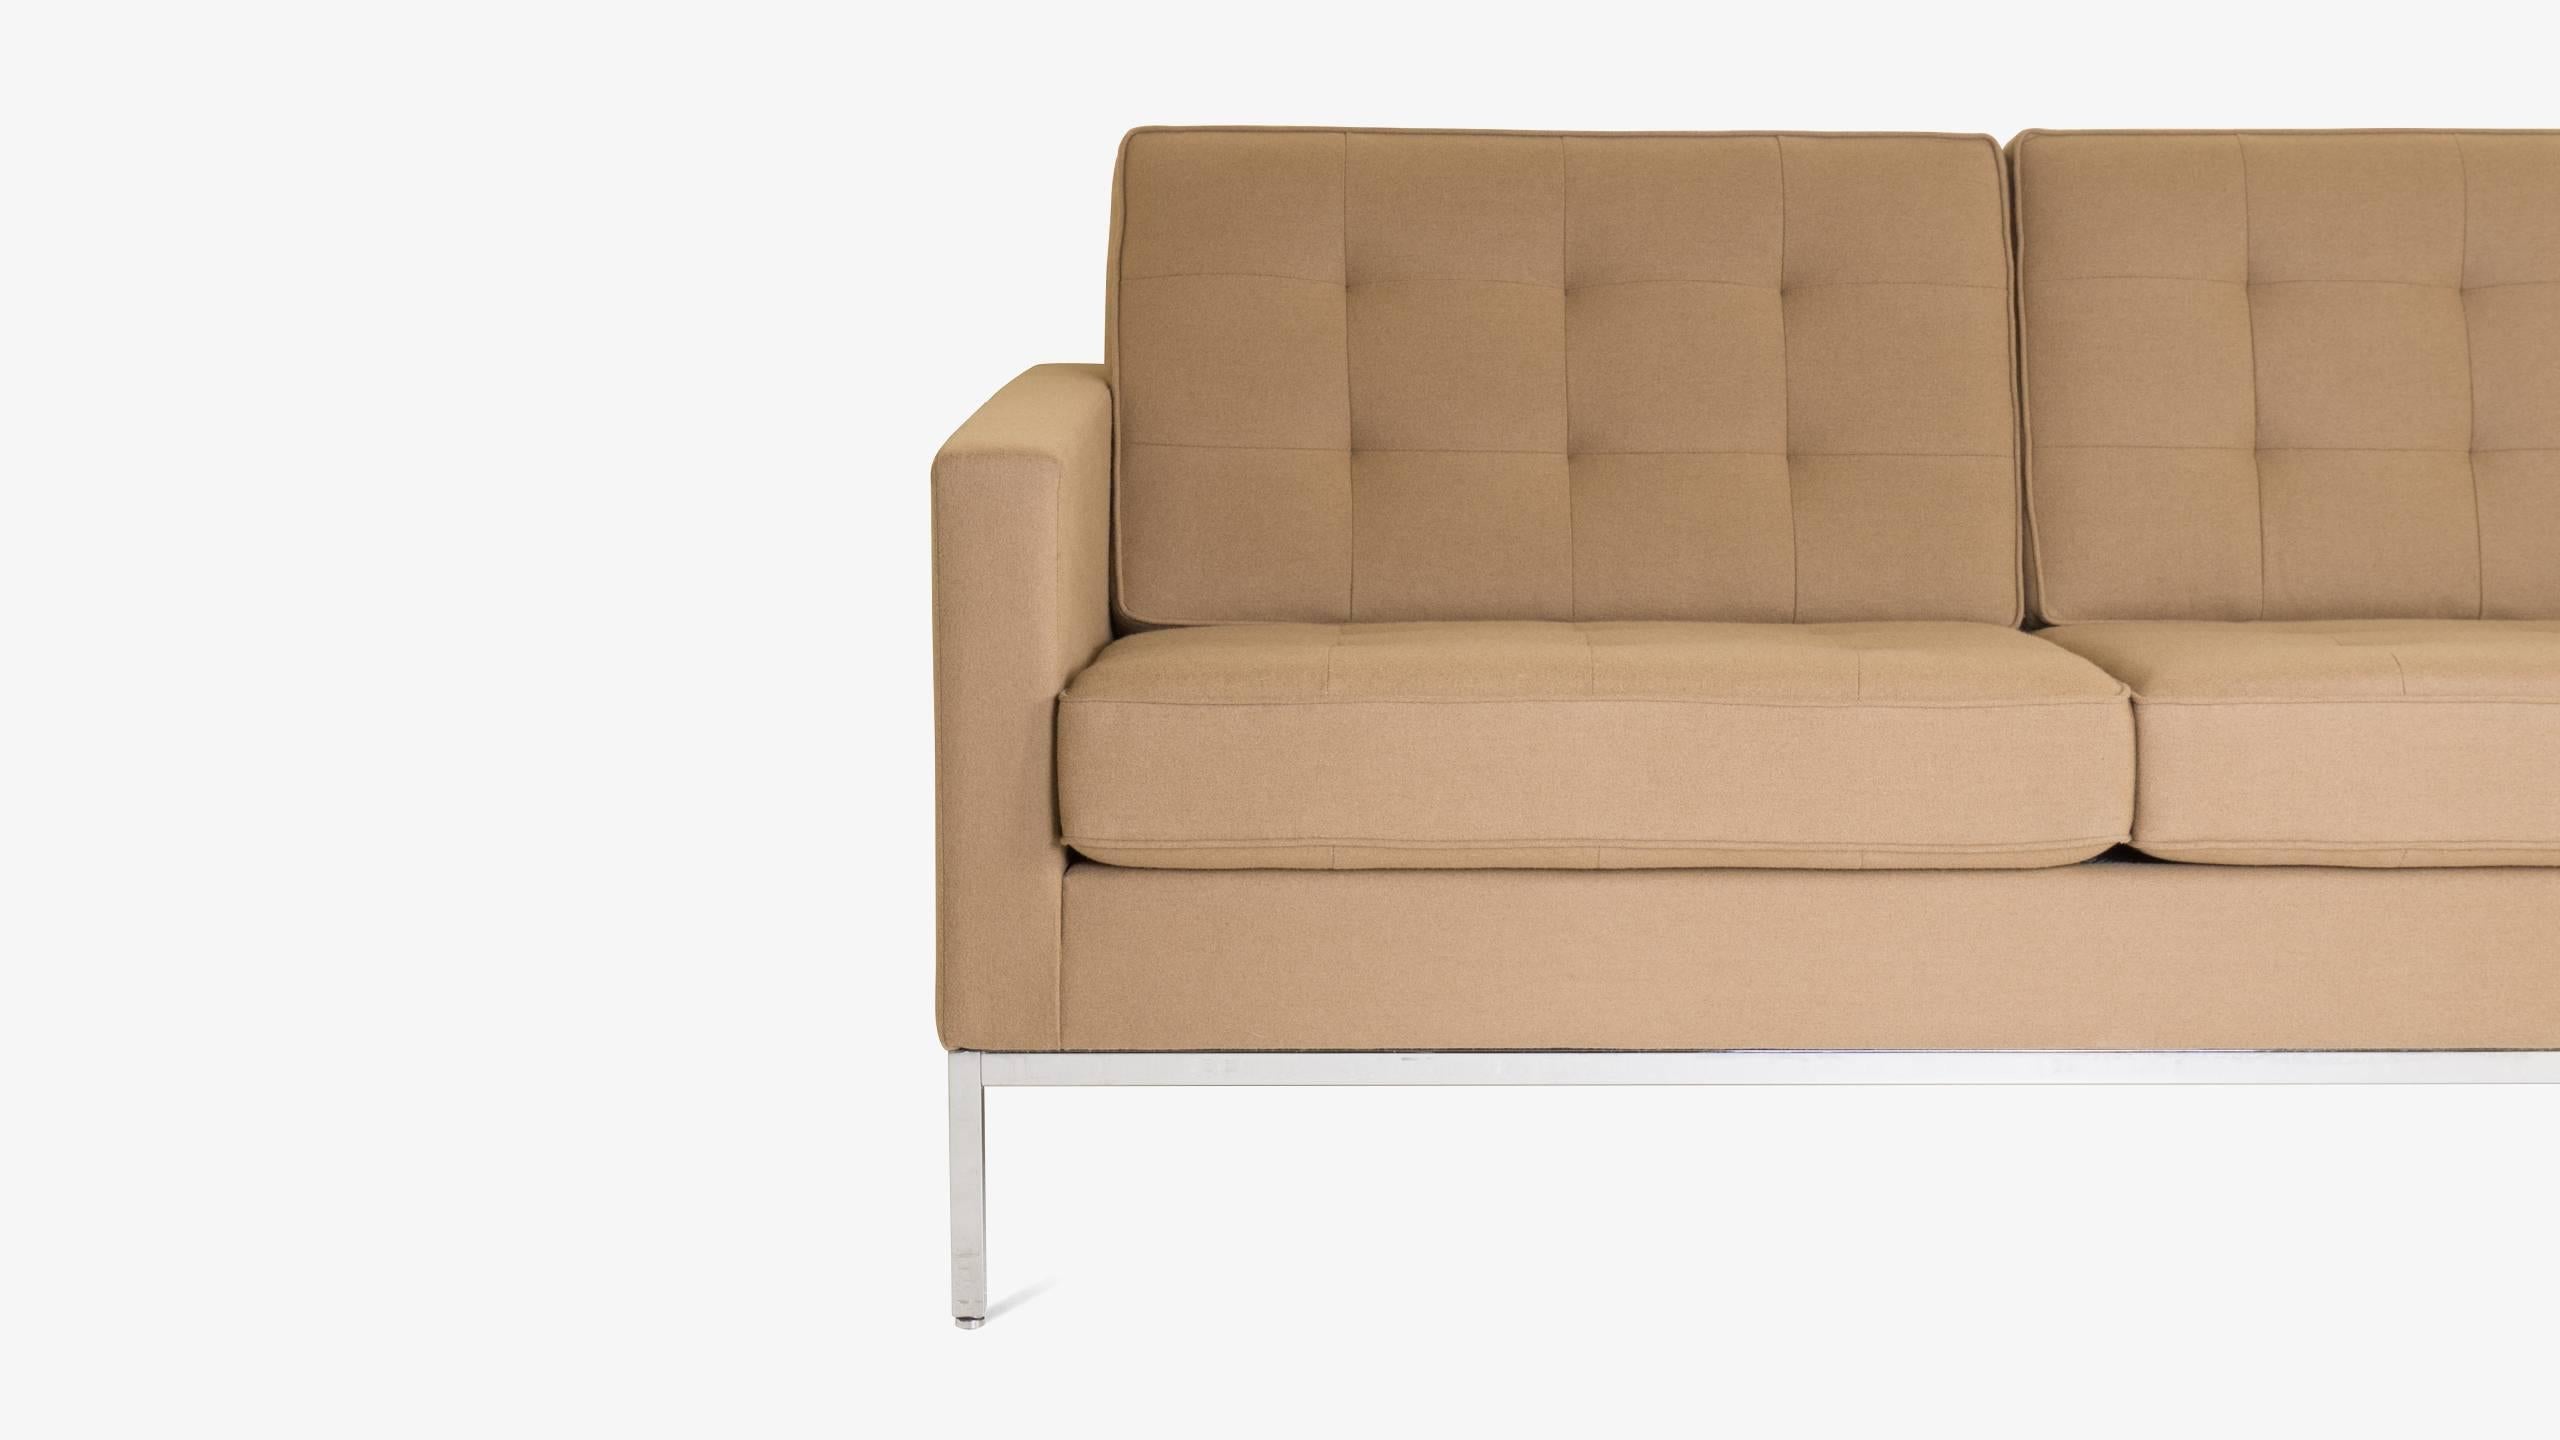 American Florence Knoll Sofa in Camel Wool Flannel